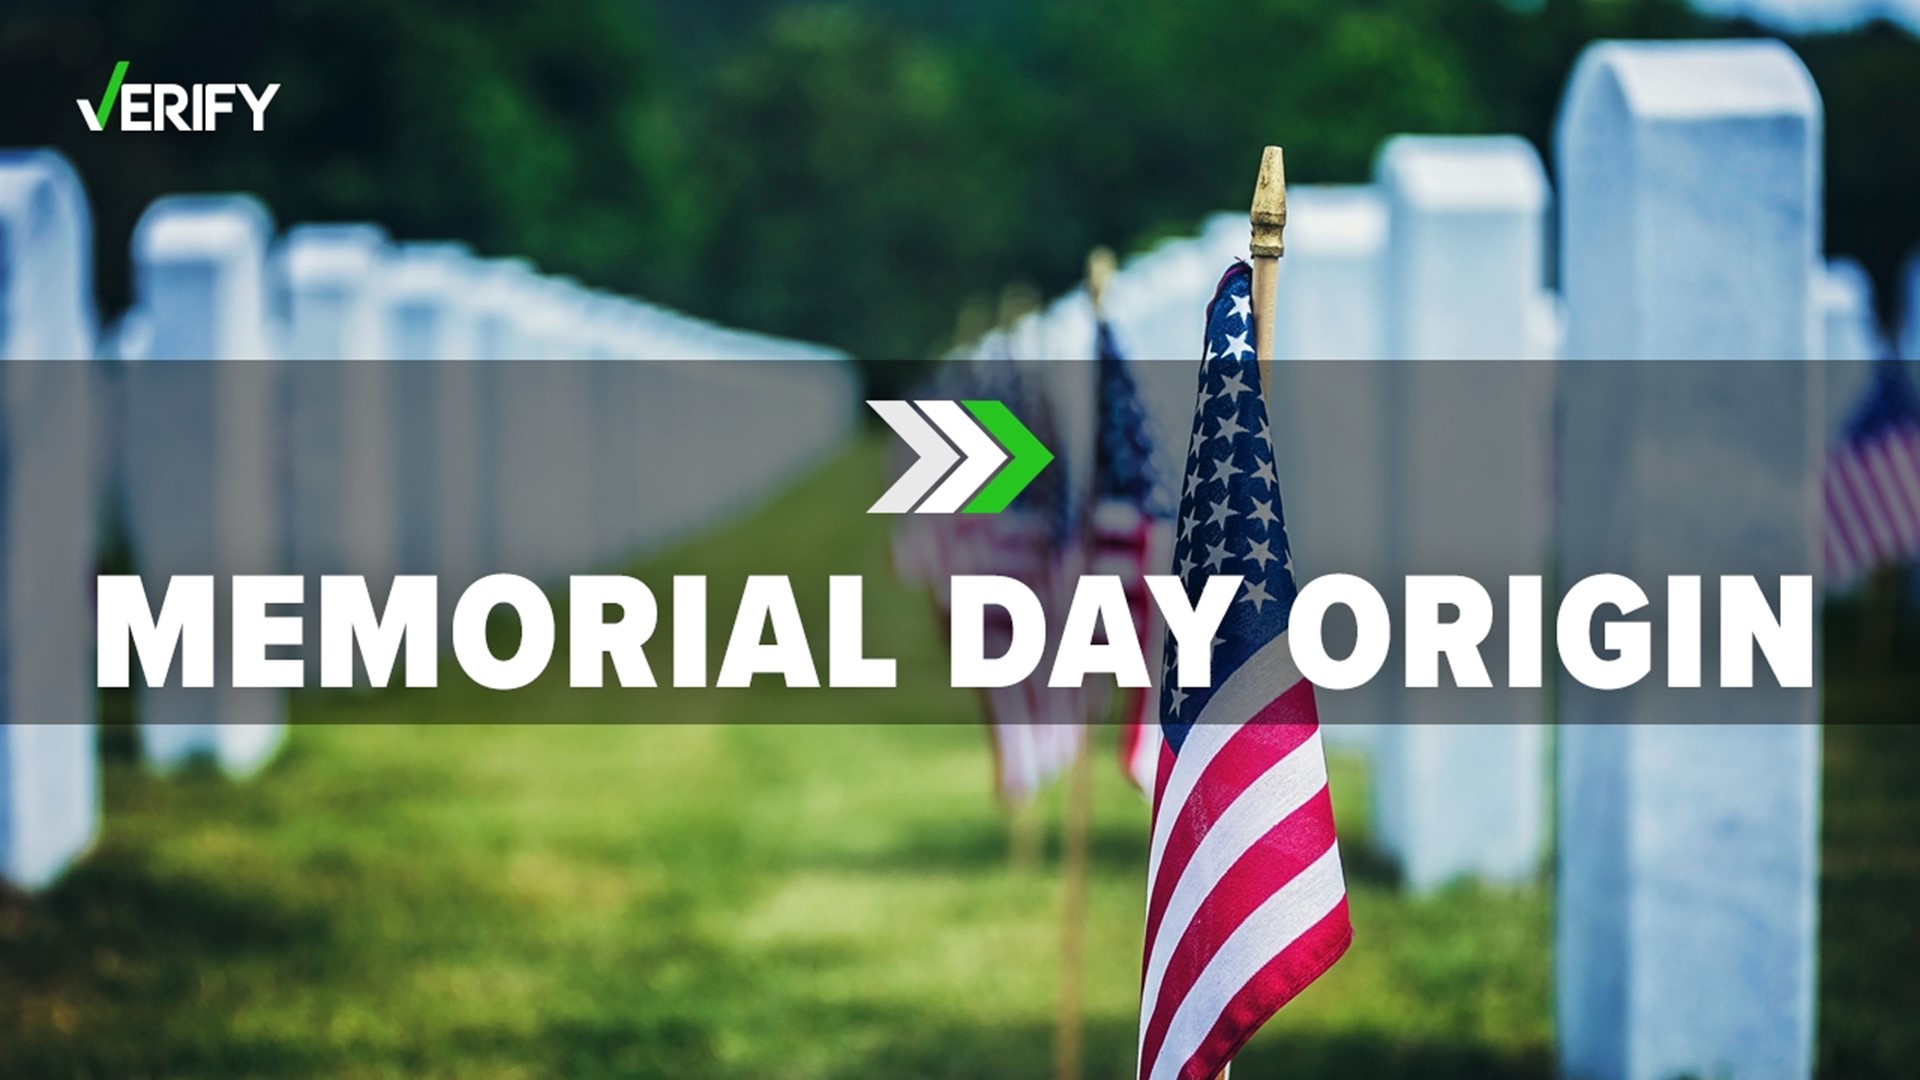 The holiday originated with tributes for soldiers who died in the Civil War.